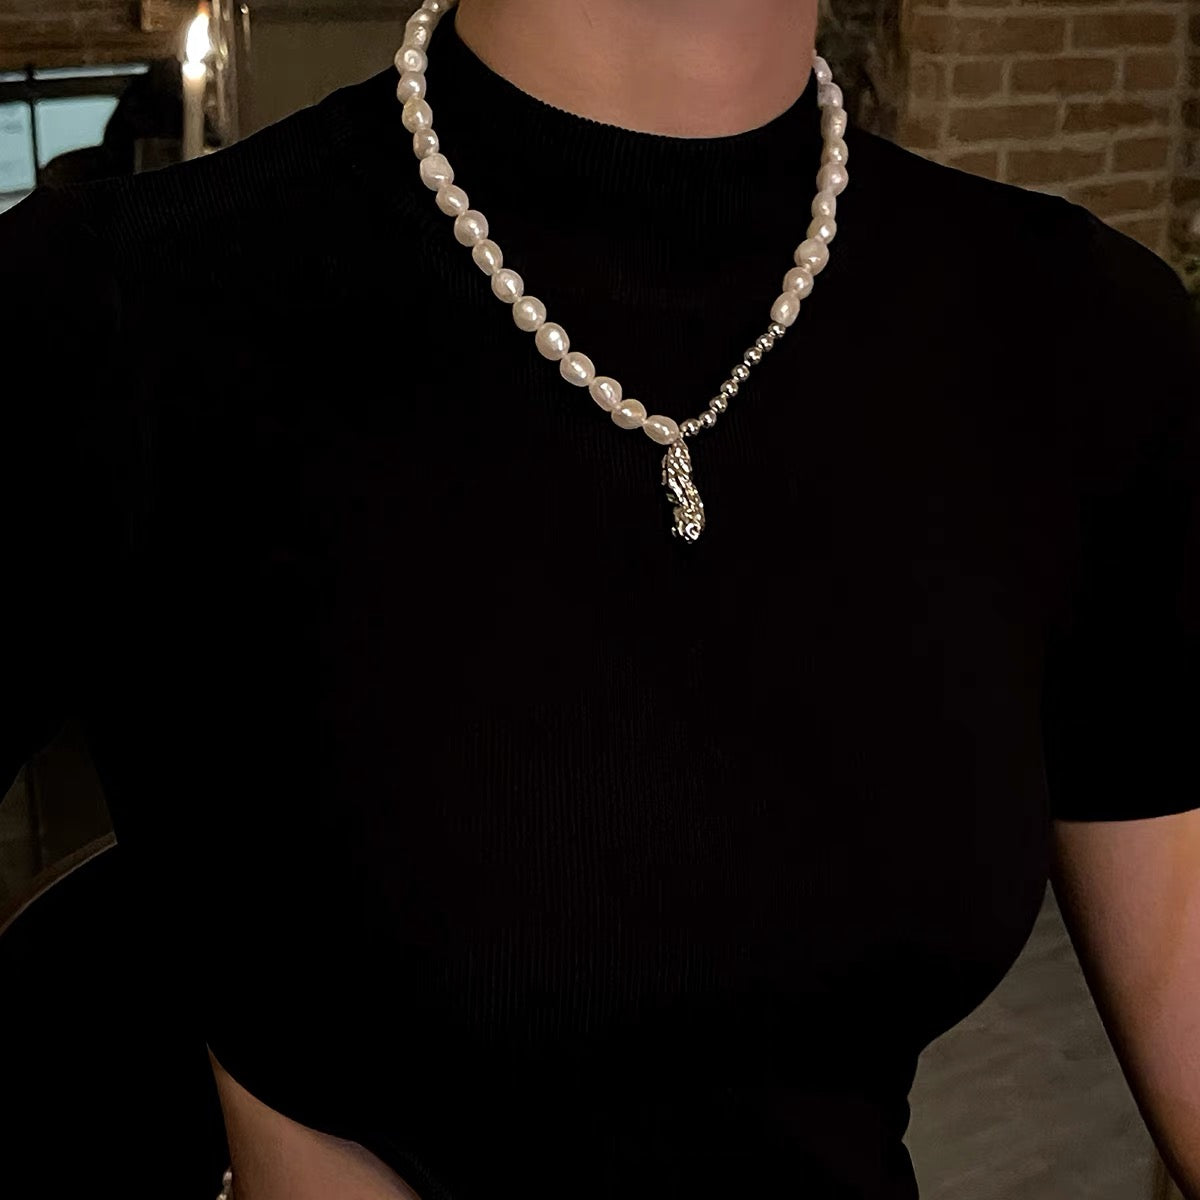 PEARL BEAD NECKLACE